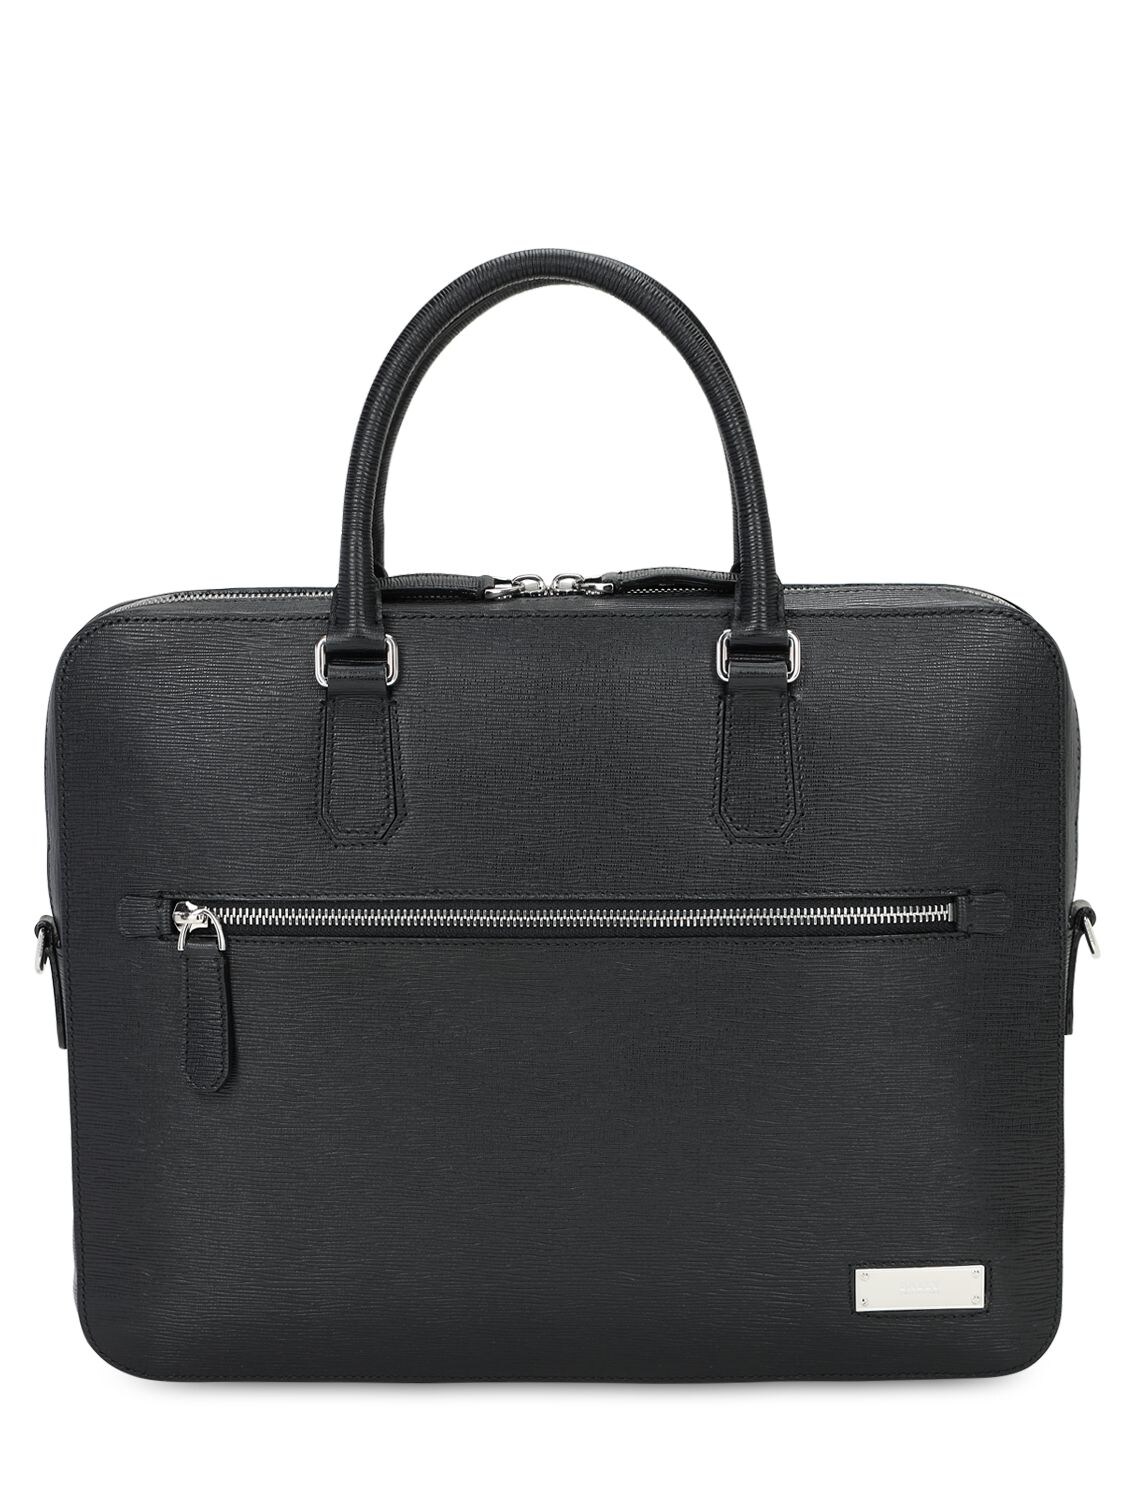 Bally Pebbled Leather Briefcase In Black